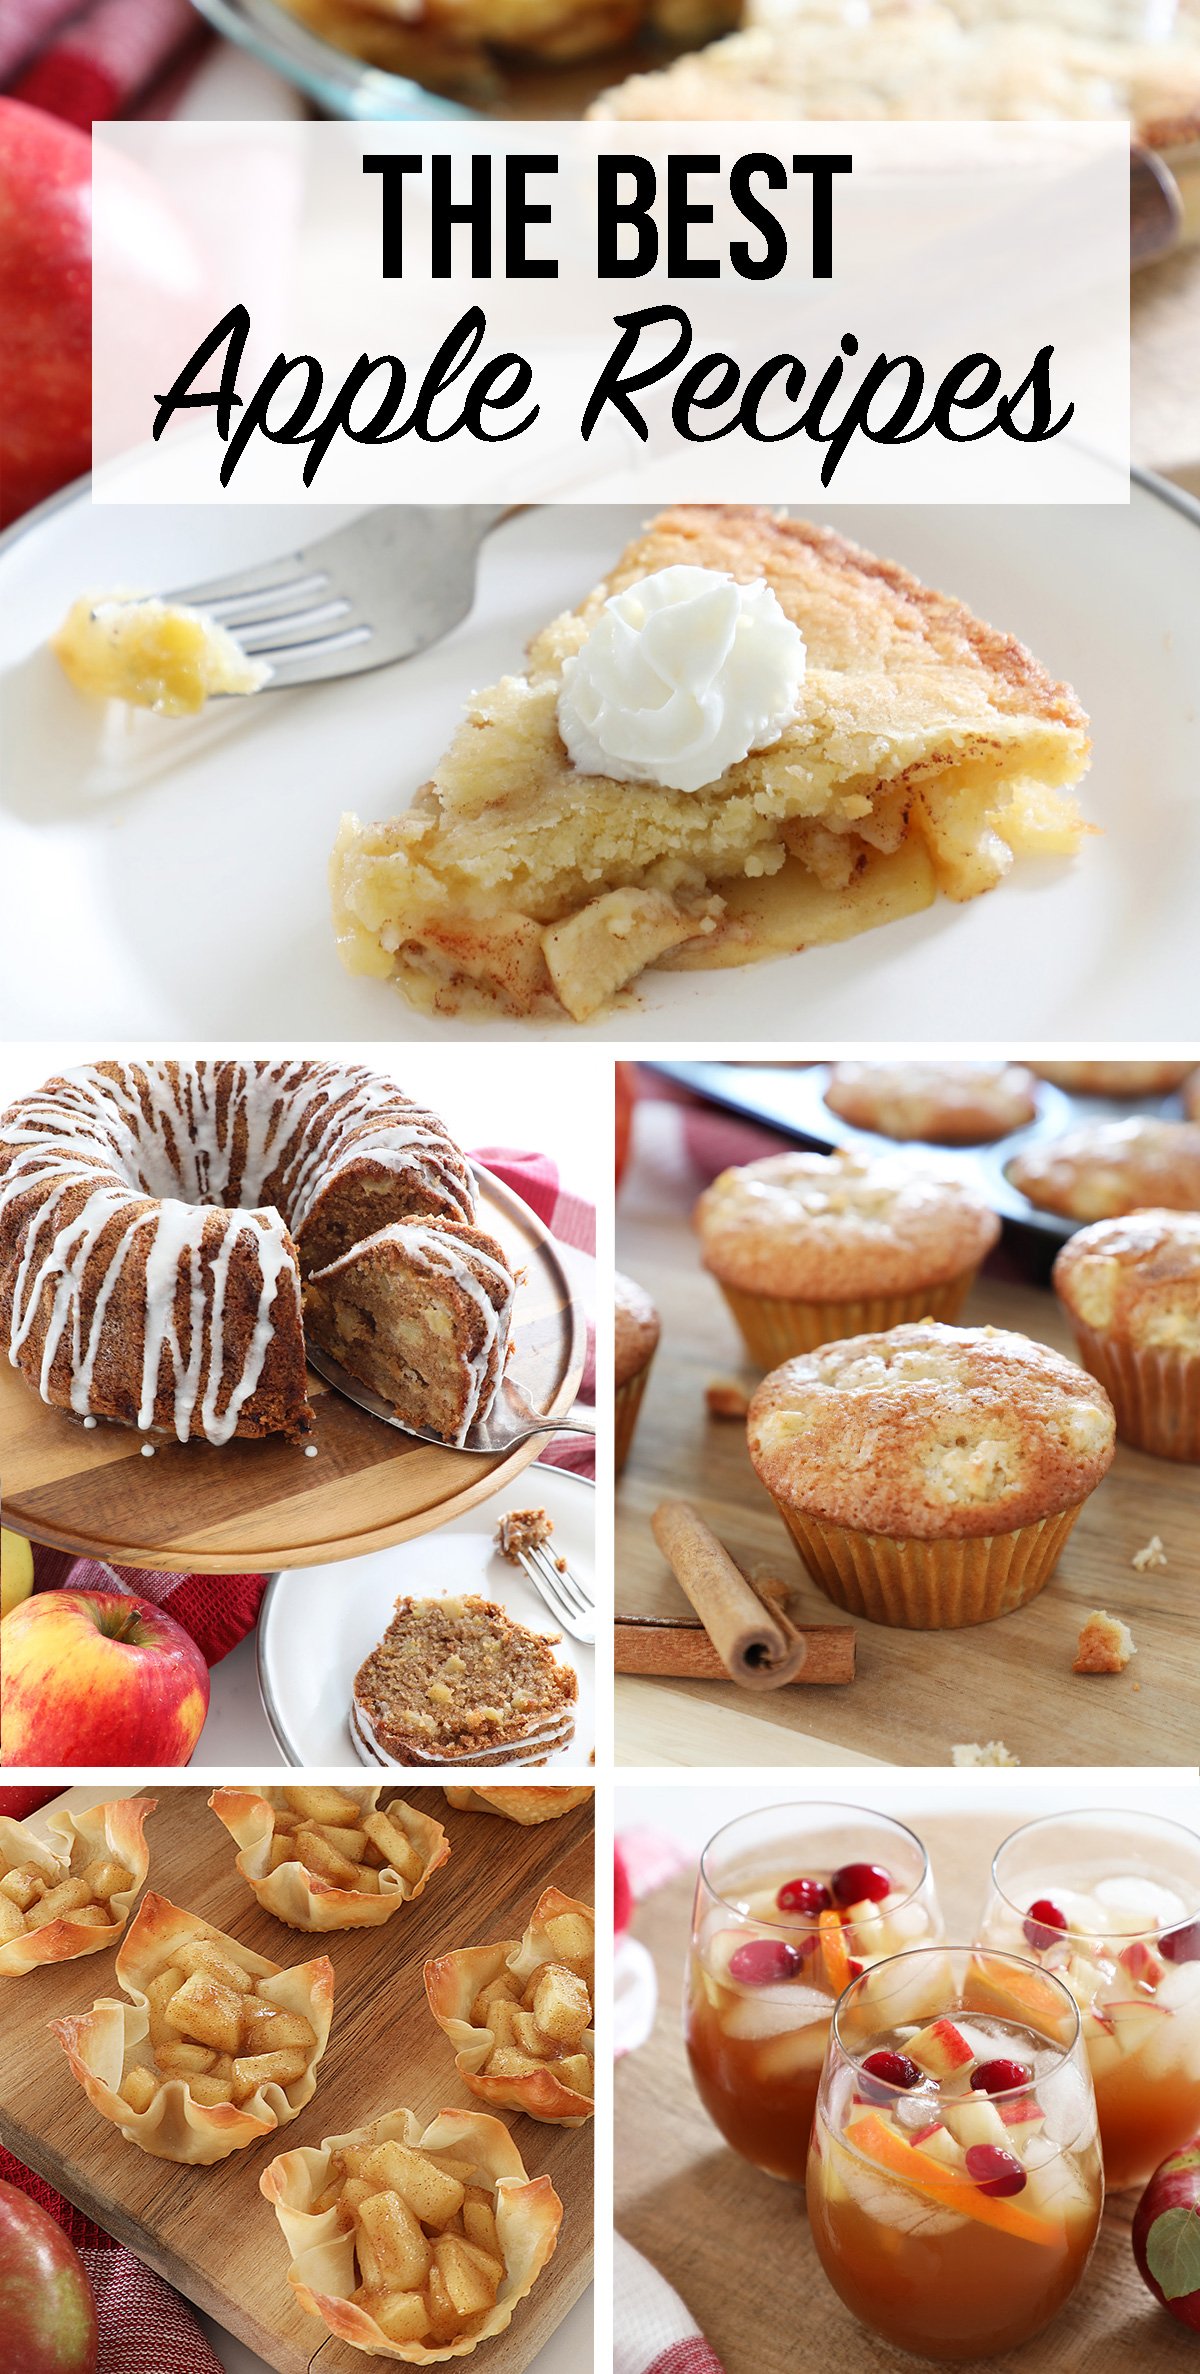 The best apple recipes